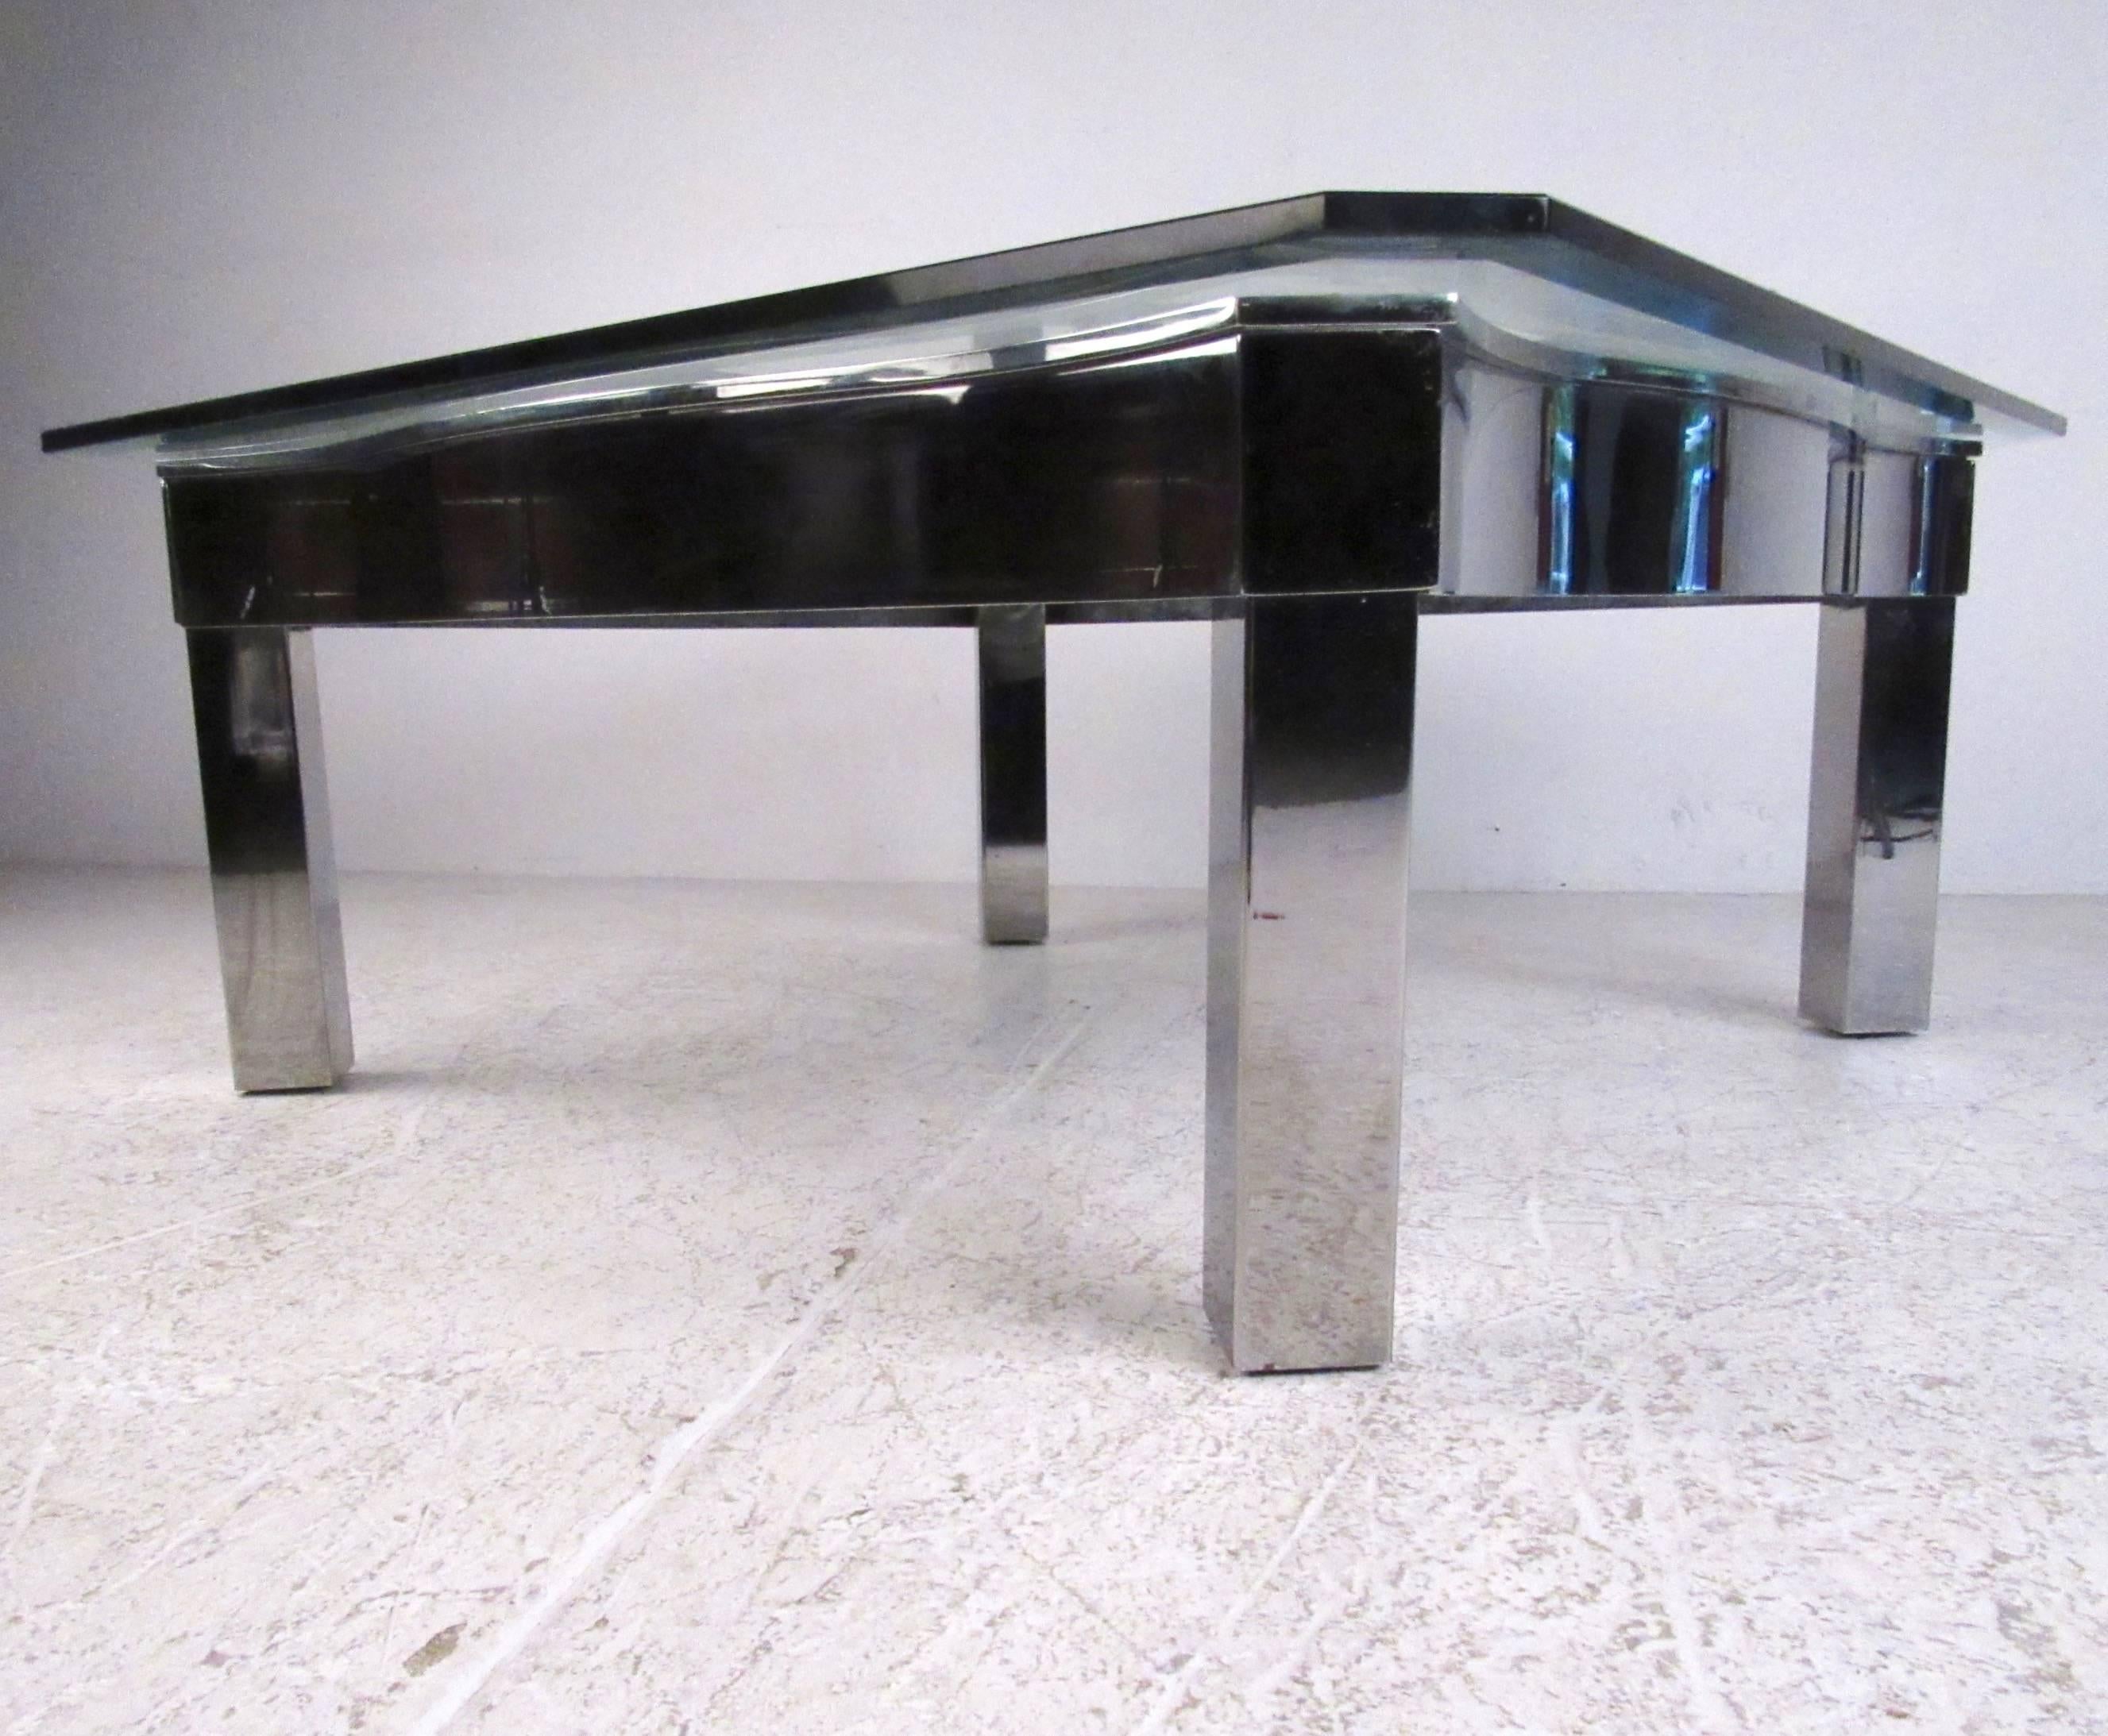 This large coffee table features a shapely chrome frame, heavy glass top with beveled edge, and makes an impressive addition to any seating area. The table's unique shape and large size is given added support by X-frame bracer between the four legs.